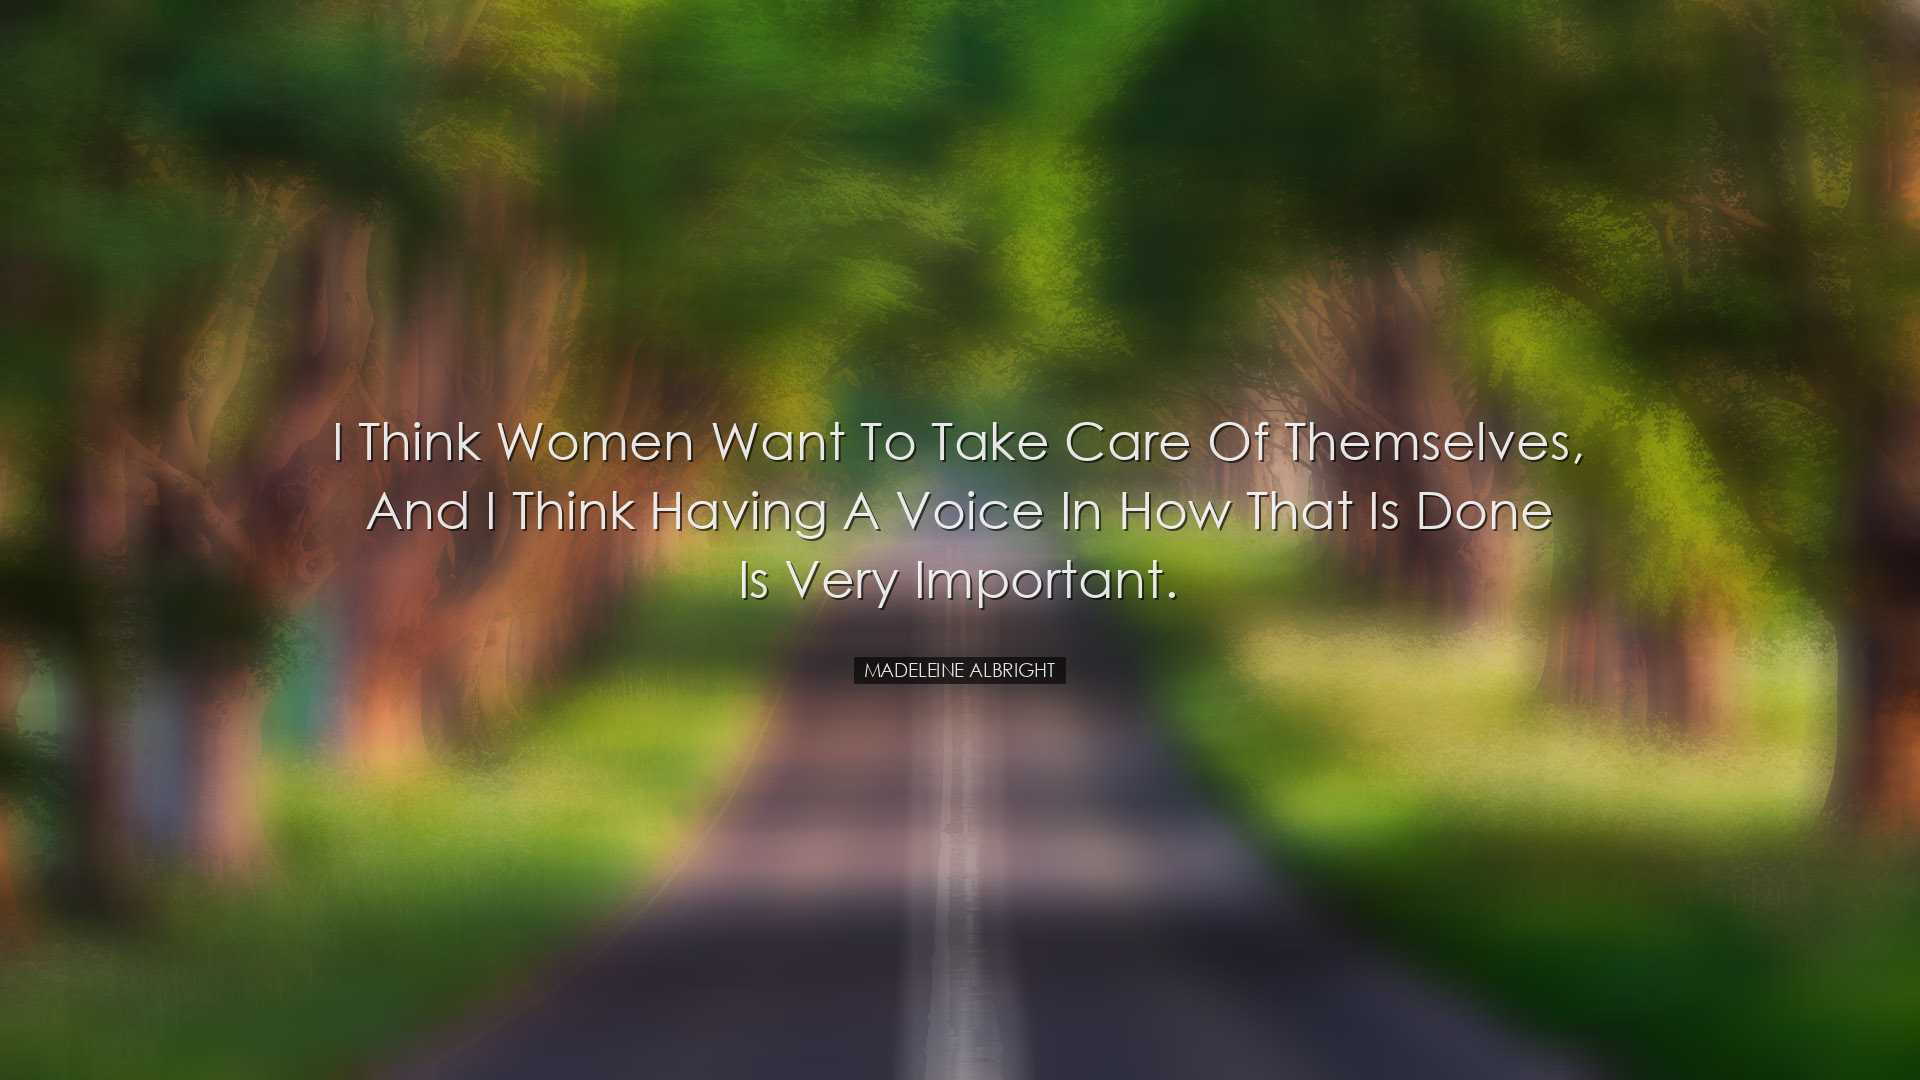 I think women want to take care of themselves, and I think having